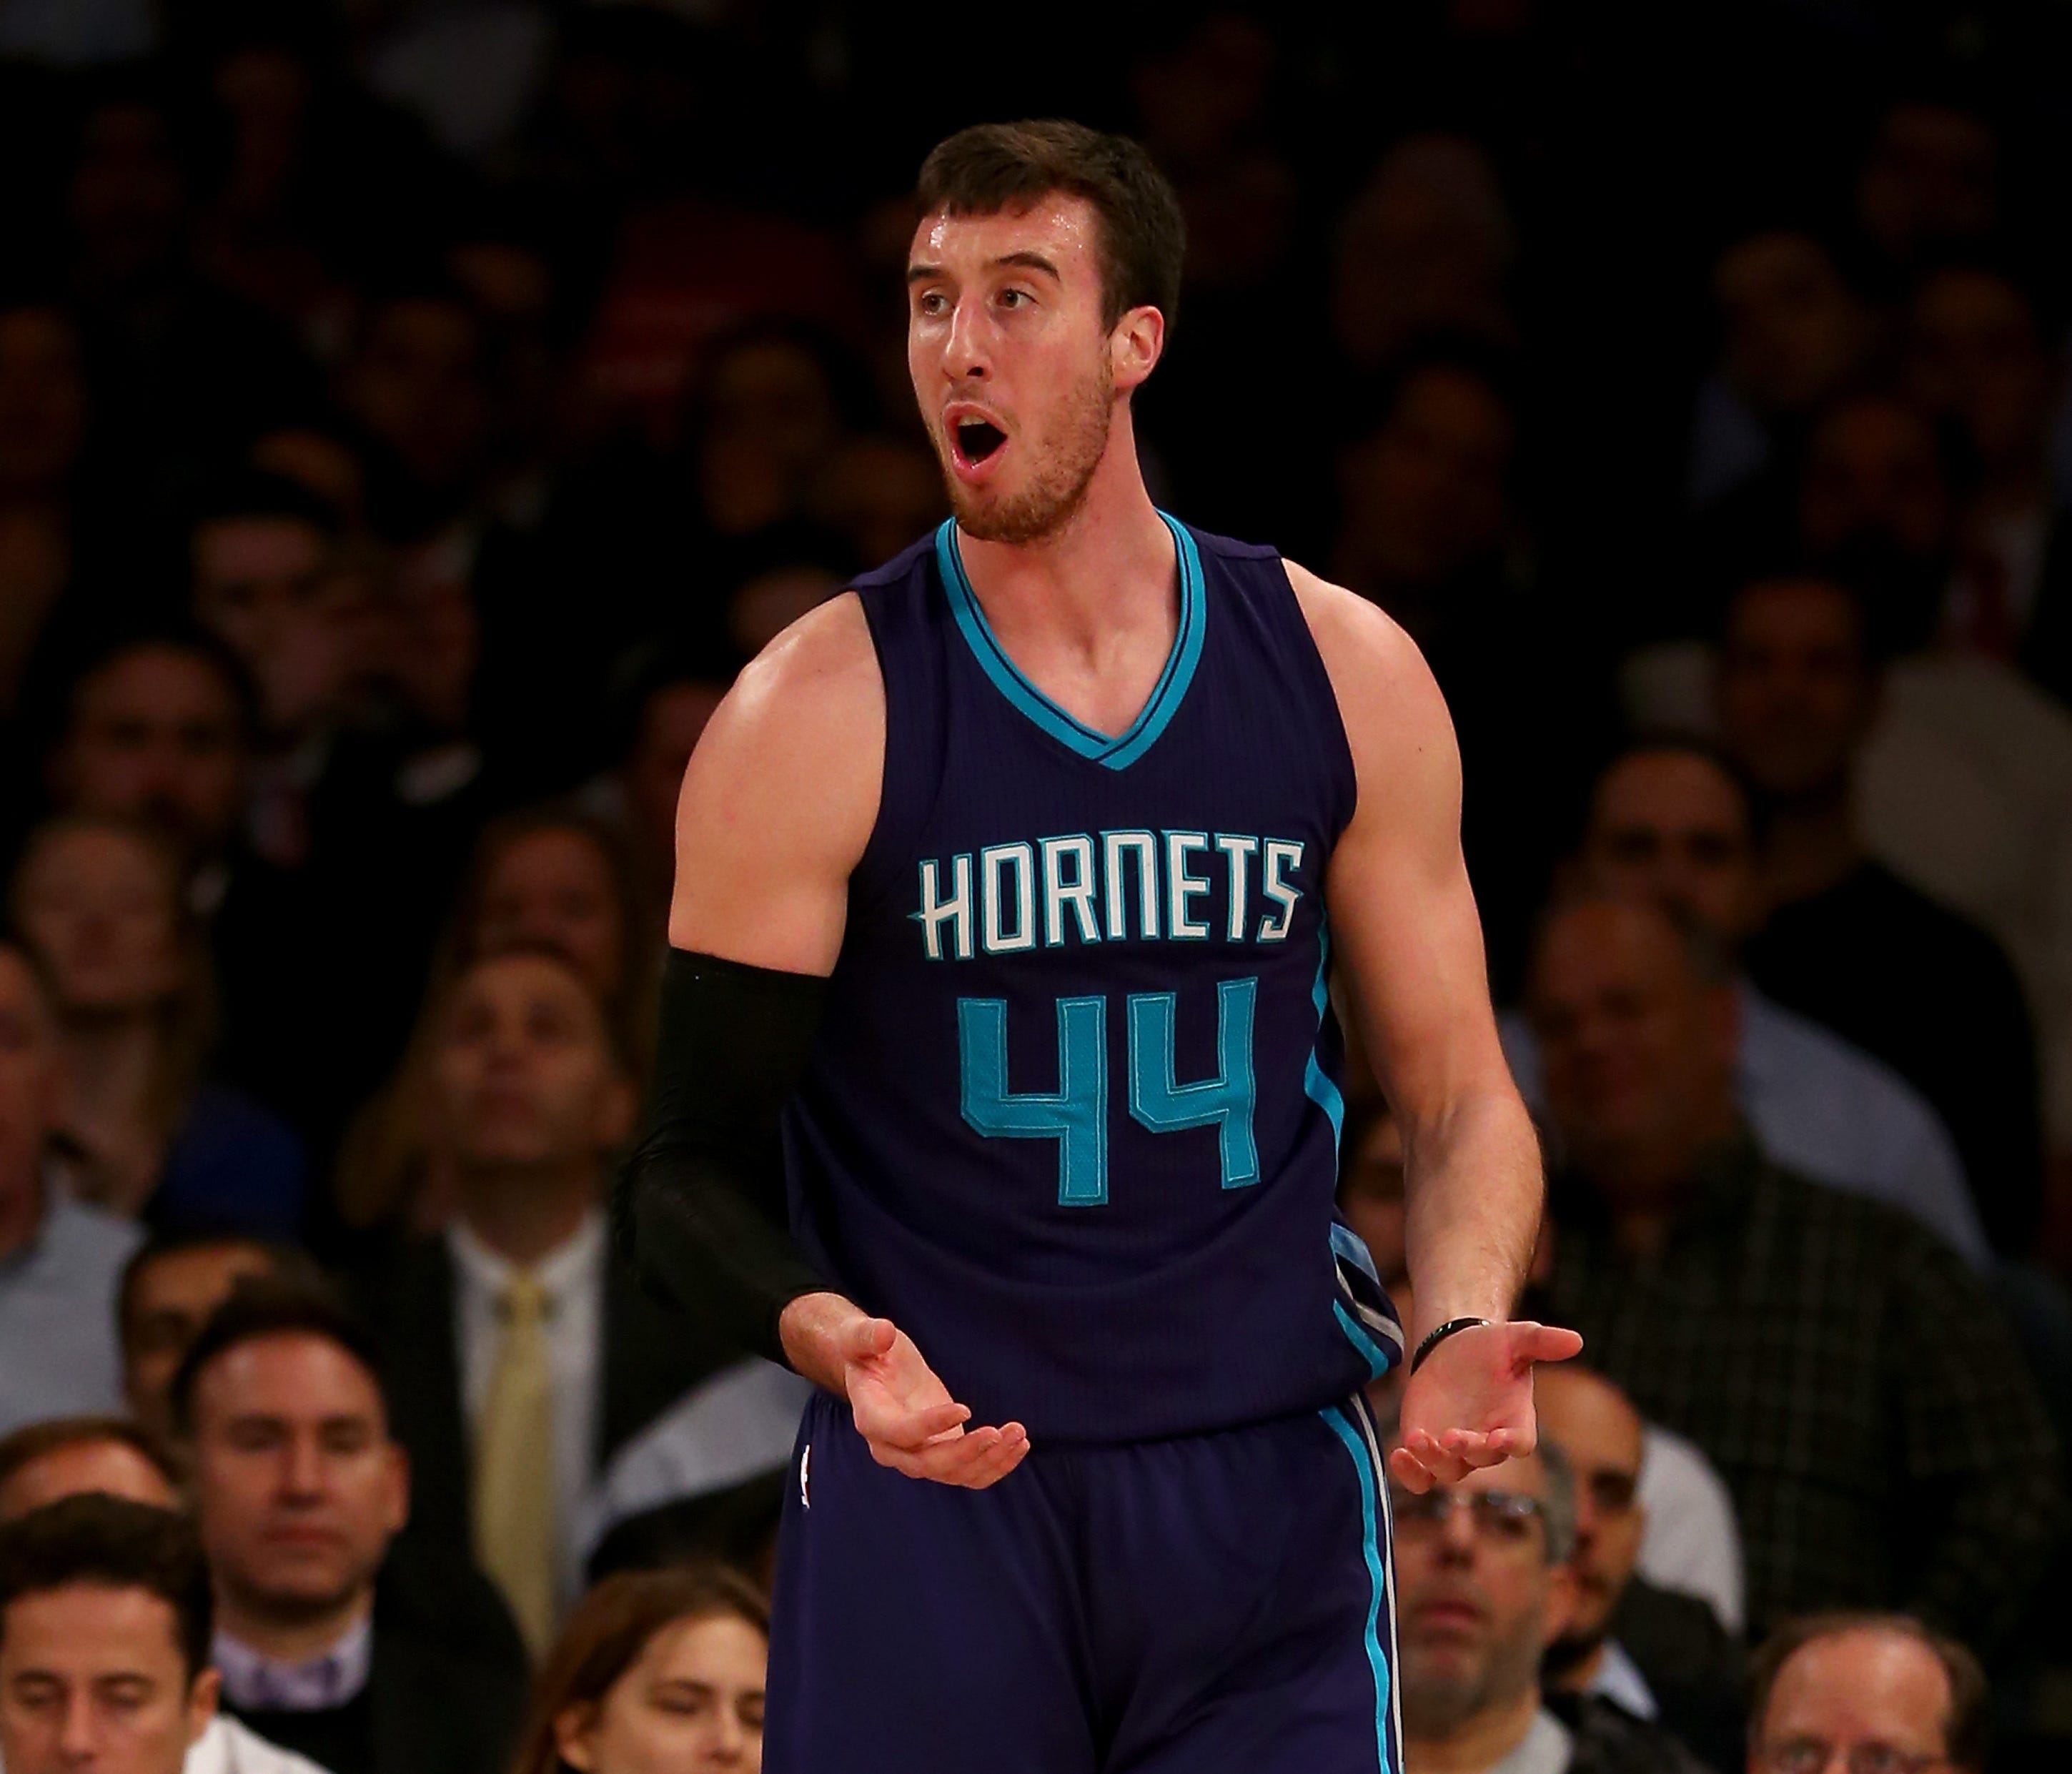 NEW YORK, NY - NOVEMBER 17:  Frank Kaminsky III #44 of the Charlotte Hornets reacts after he is called for a foul in the first half against the New York Knicks at Madison Square Garden on November 17, 2015 in New York City.NOTE TO USER: User expressl